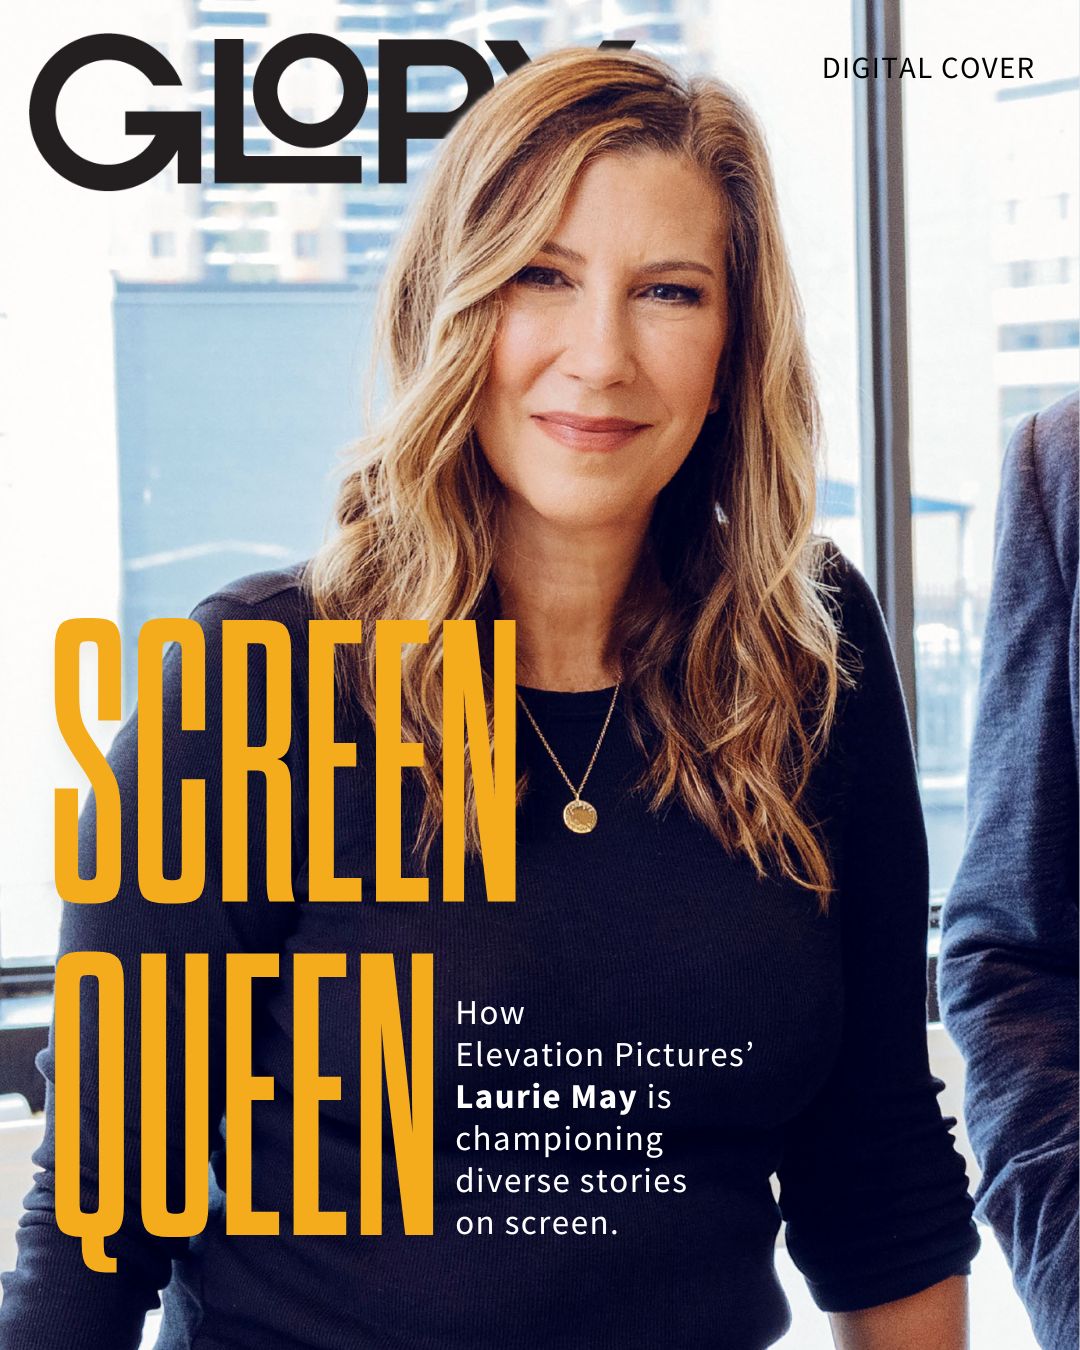 GLORY Magazine cover featuring Laurie May in a black sweater and the words "Screen Queen" overtop. She is resting against a desk with office towers in the background.